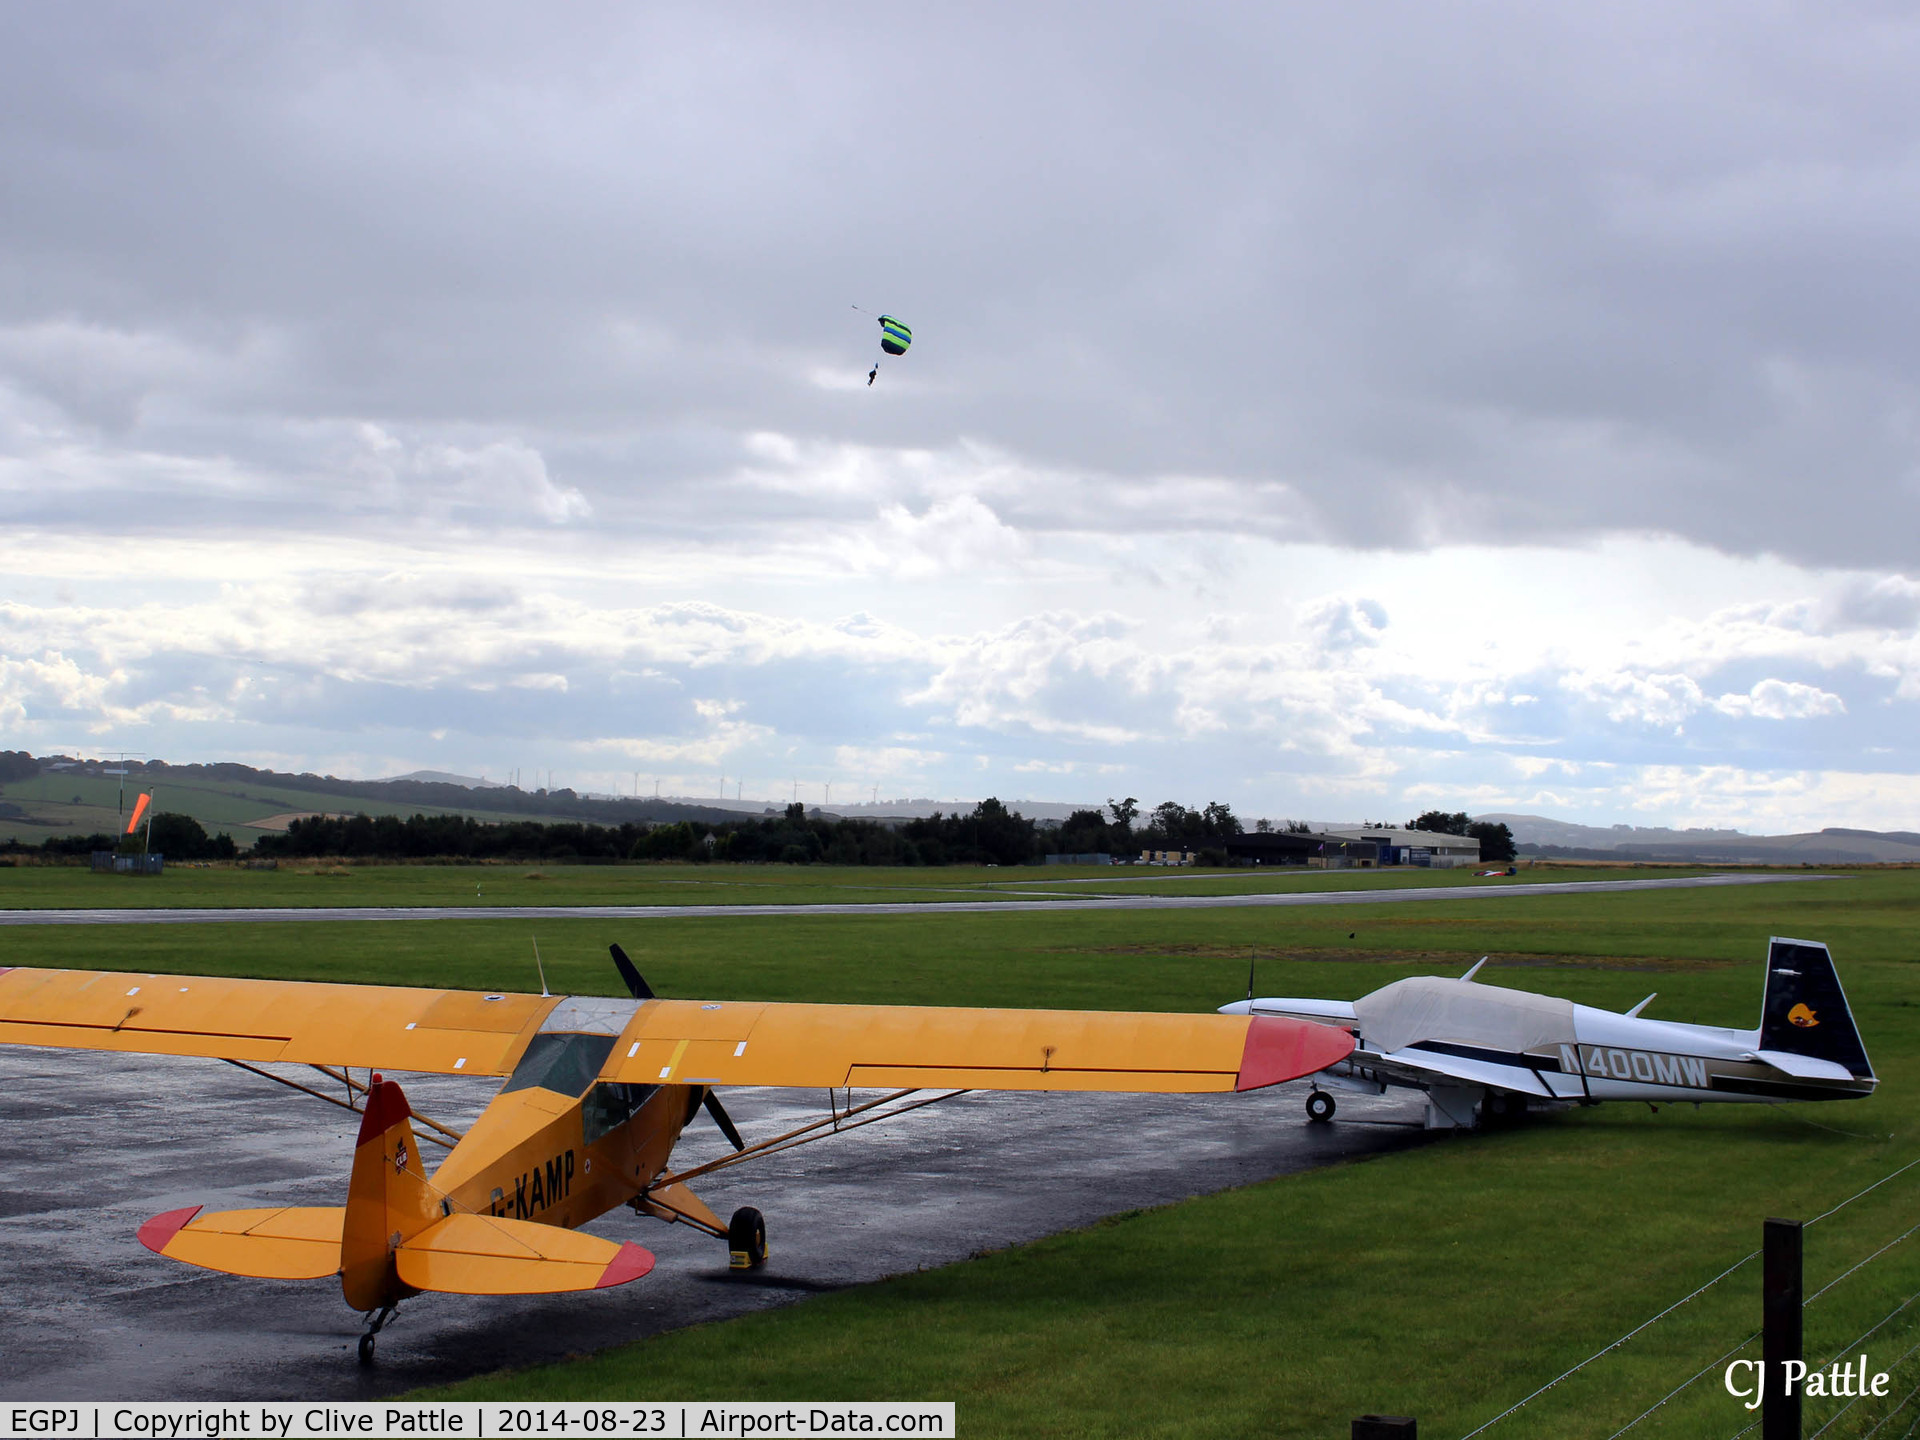 Fife Airport, Glenrothes, Scotland United Kingdom (EGPJ) - Airfield scene looking west, parked aircraft and skydiver landing in the background at Glenrothes EGPJ